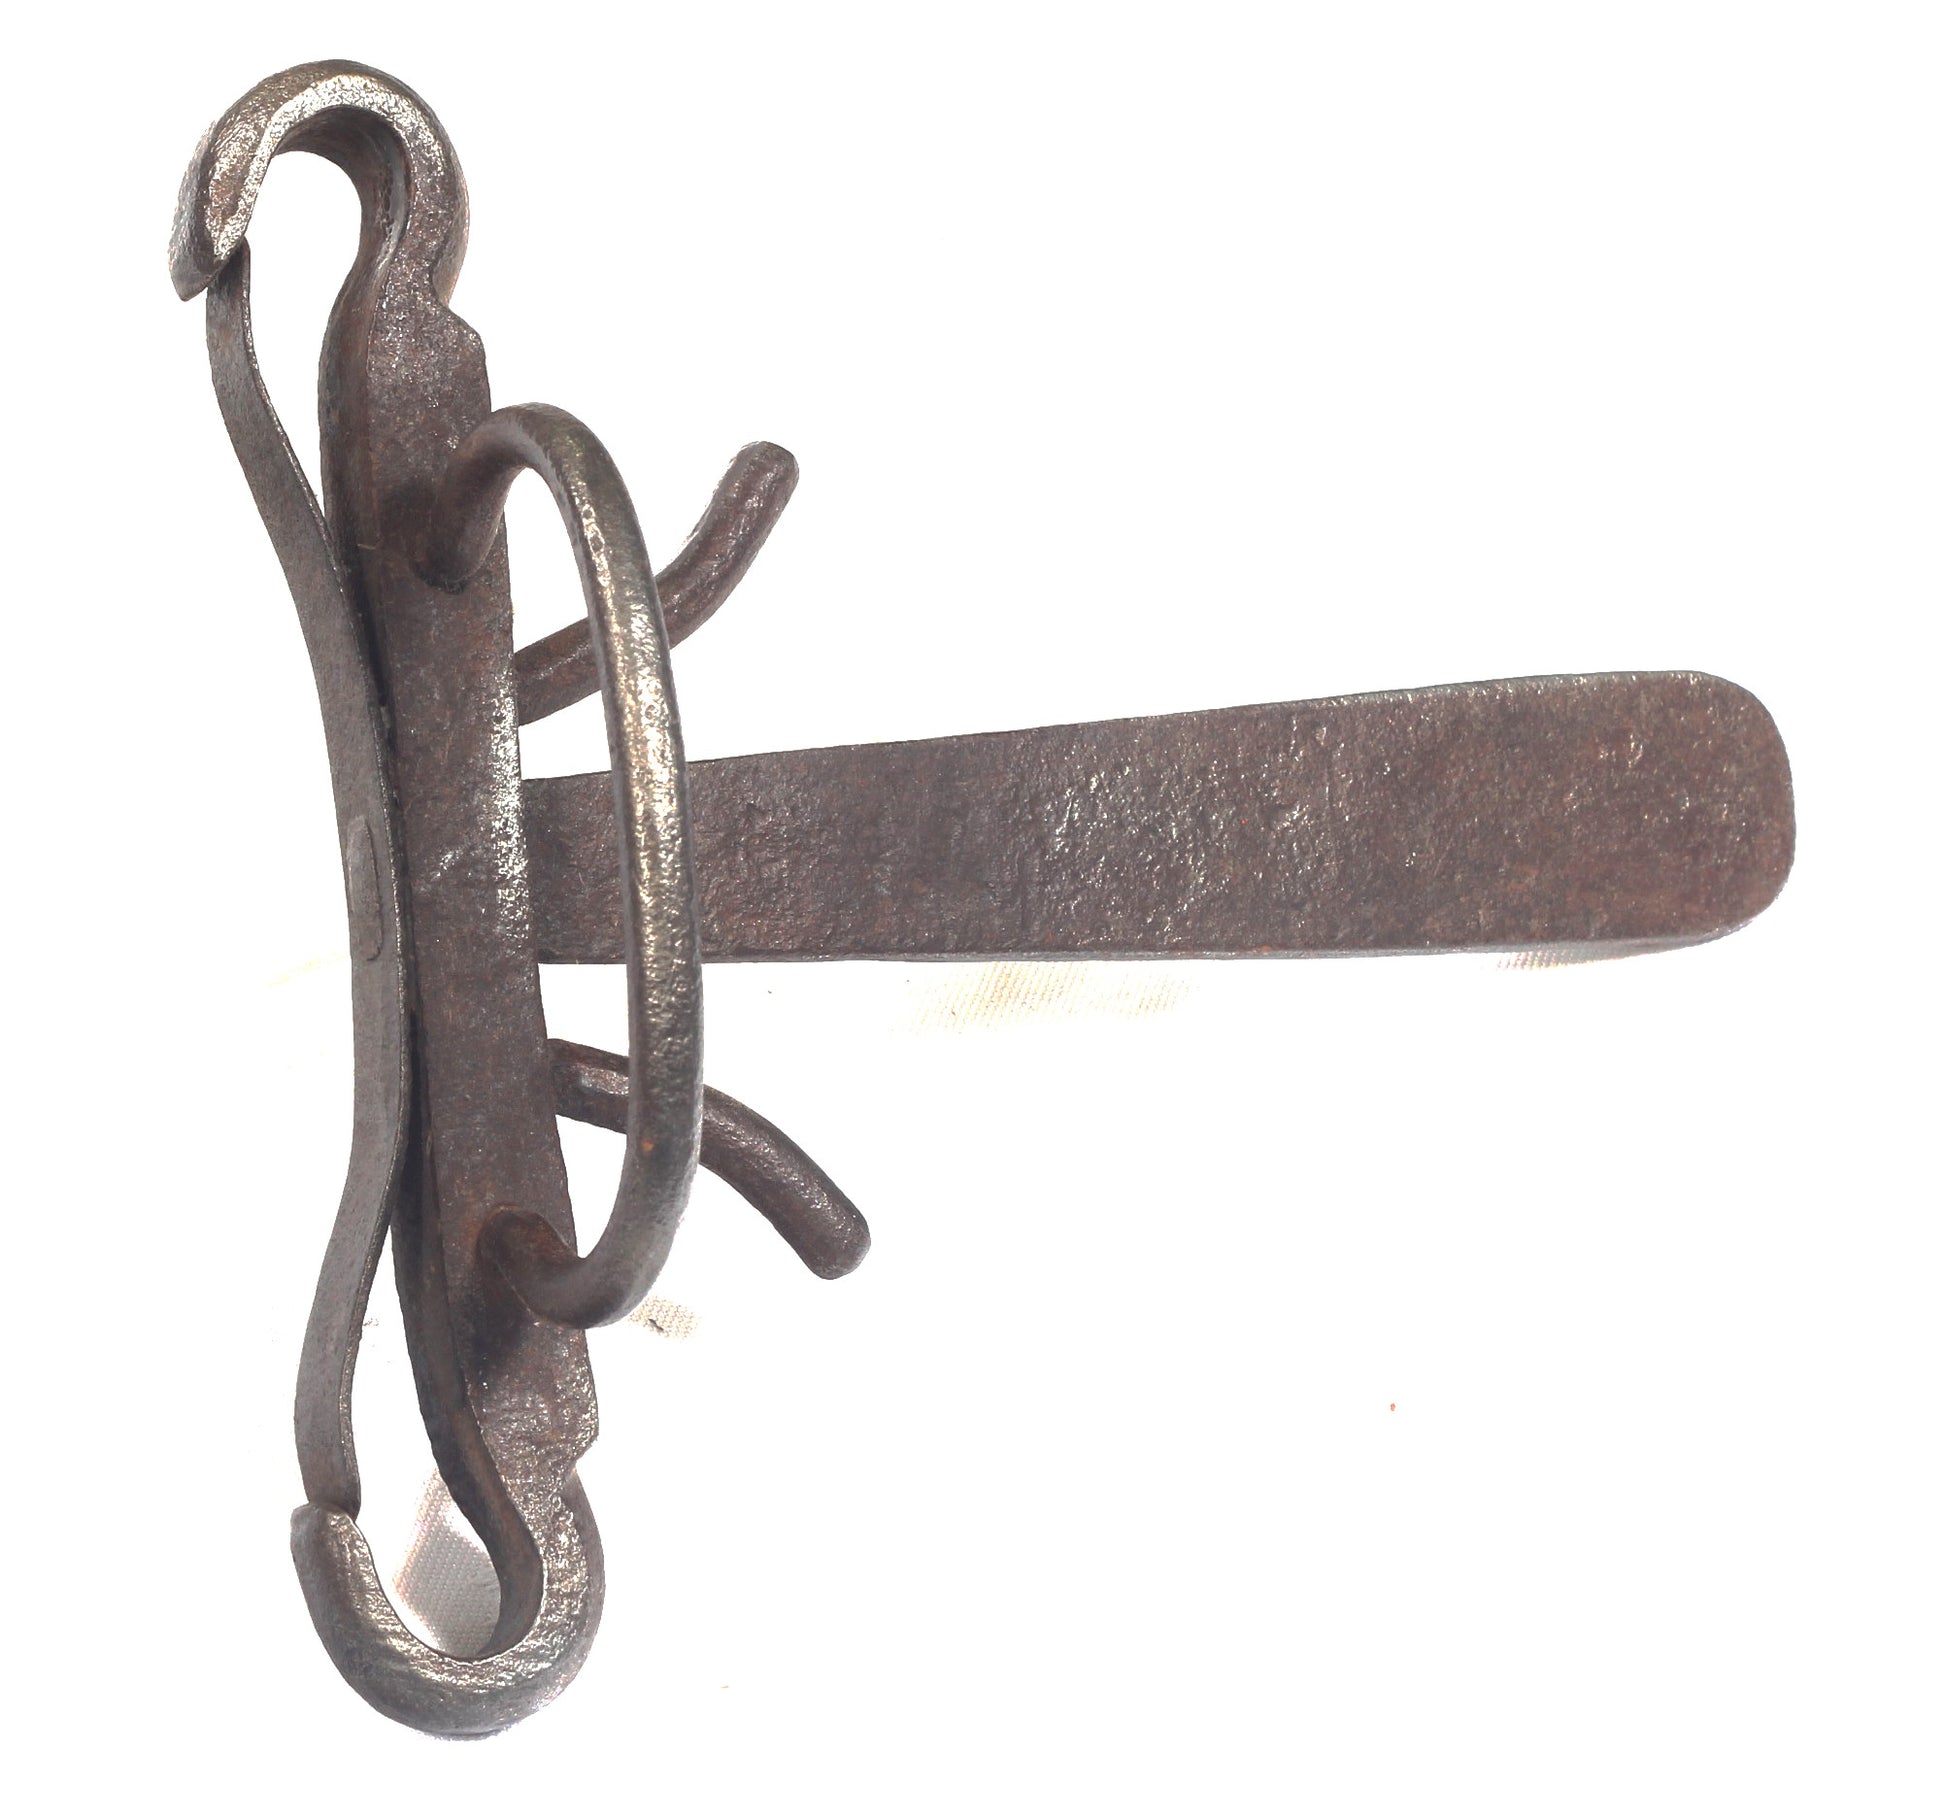 A Steel Spring or Butterfly Bit with Tongue Plate